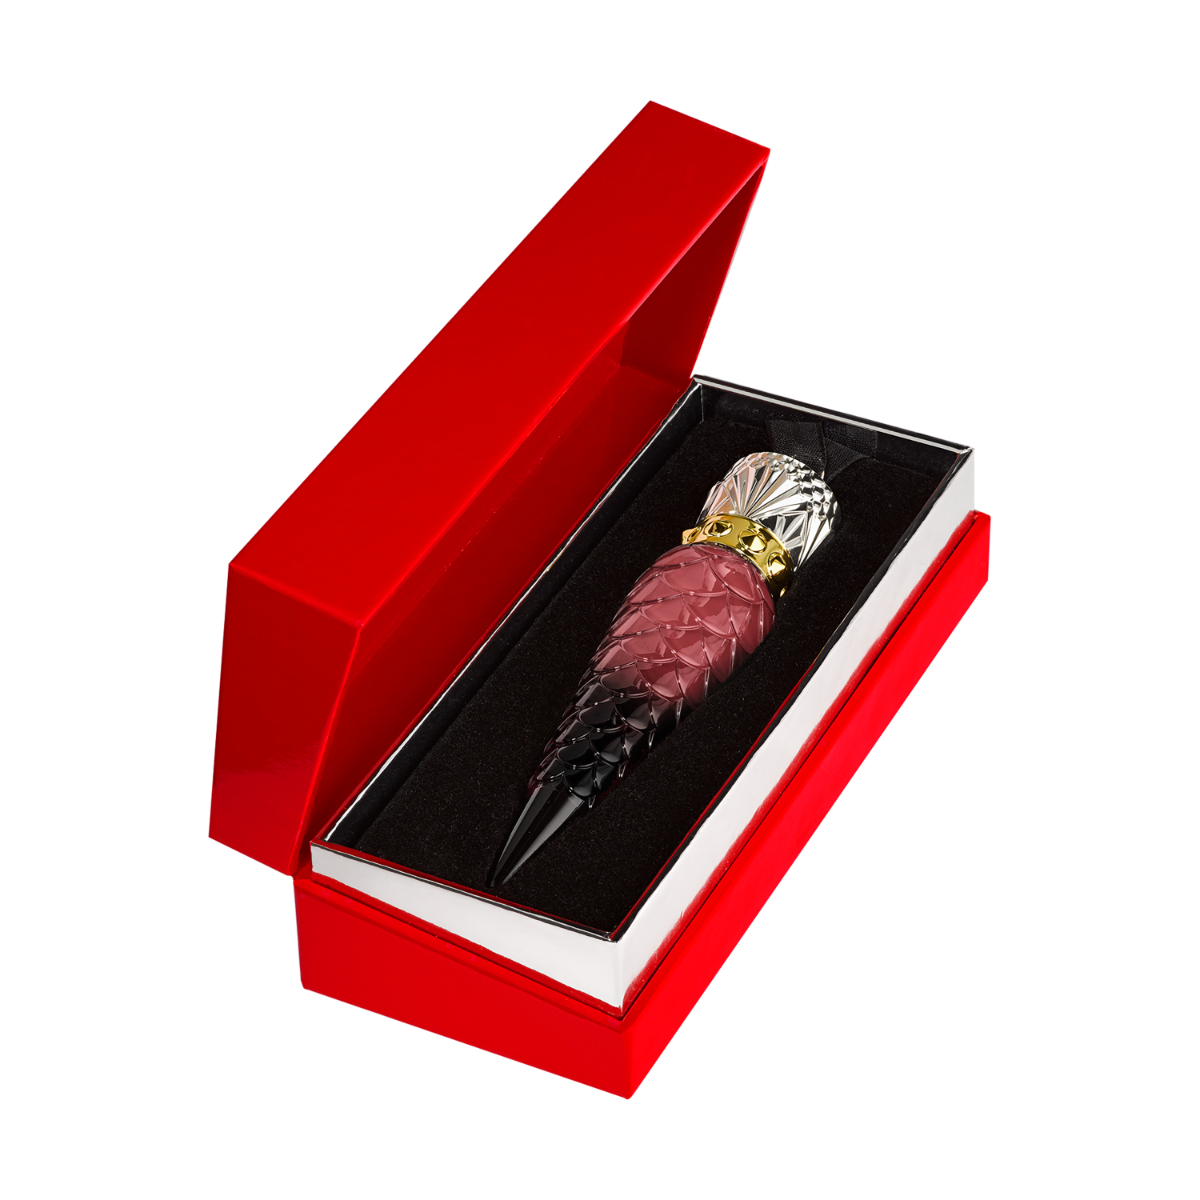 Louboutin Lipstick Belly Bloom, Tres Decollete, You You, Rose du